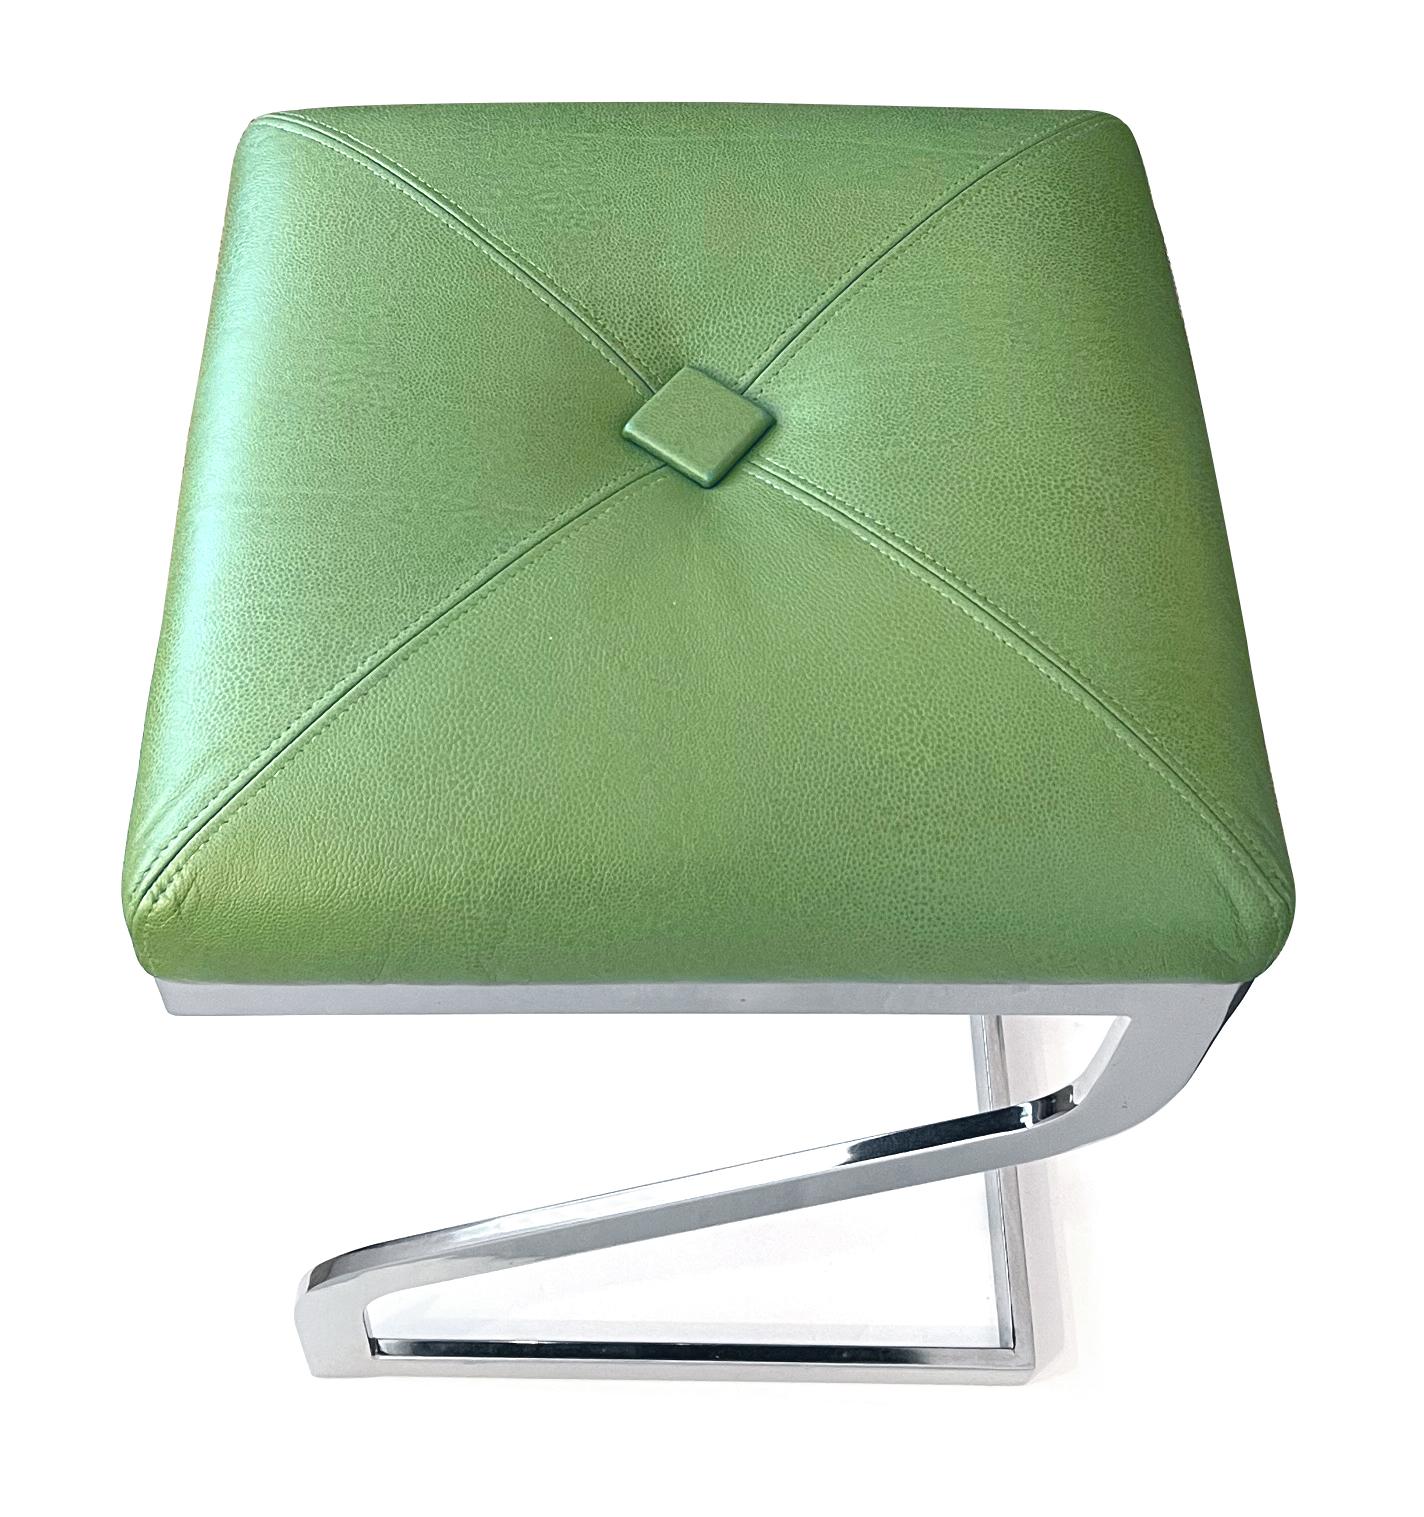 North American Pair of 1970's Z-Form Stools with Apple Green Leather Upholstery For Sale